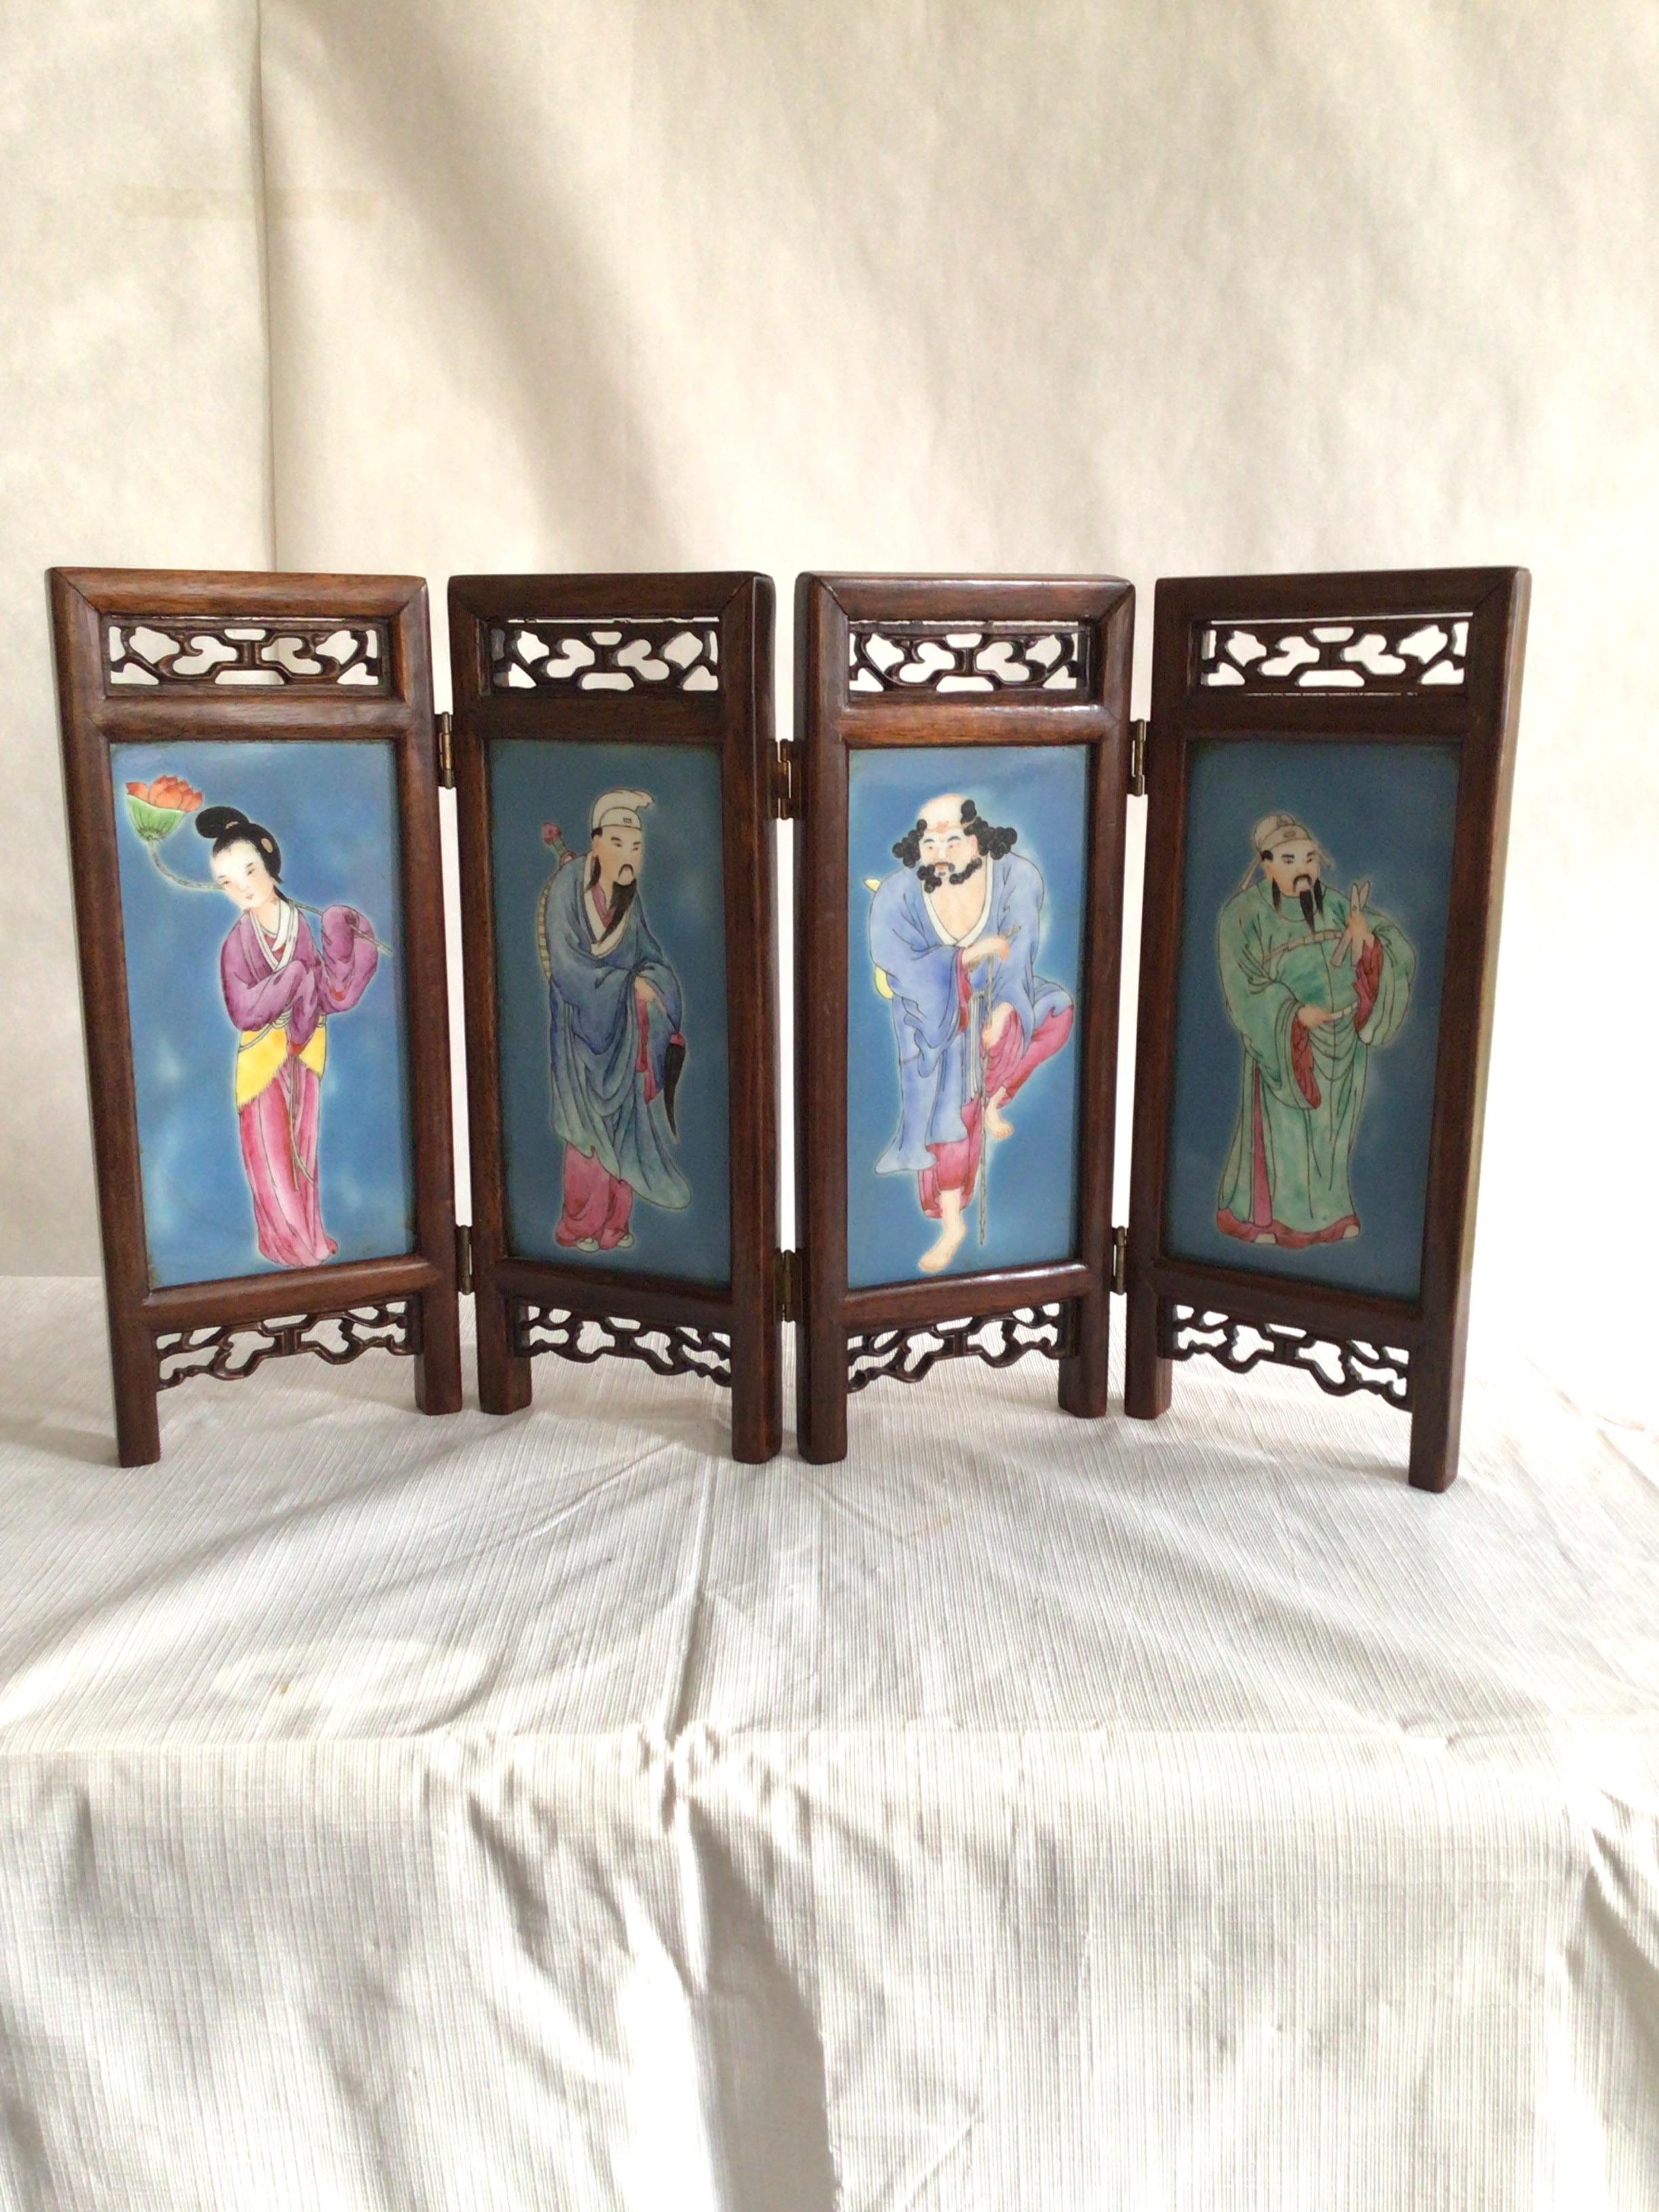 1960s hand-painted wood and porcelain tabletop screen 
Each panel is 5” wide and has prominent colors of blue, green, pink, and yellow.
  